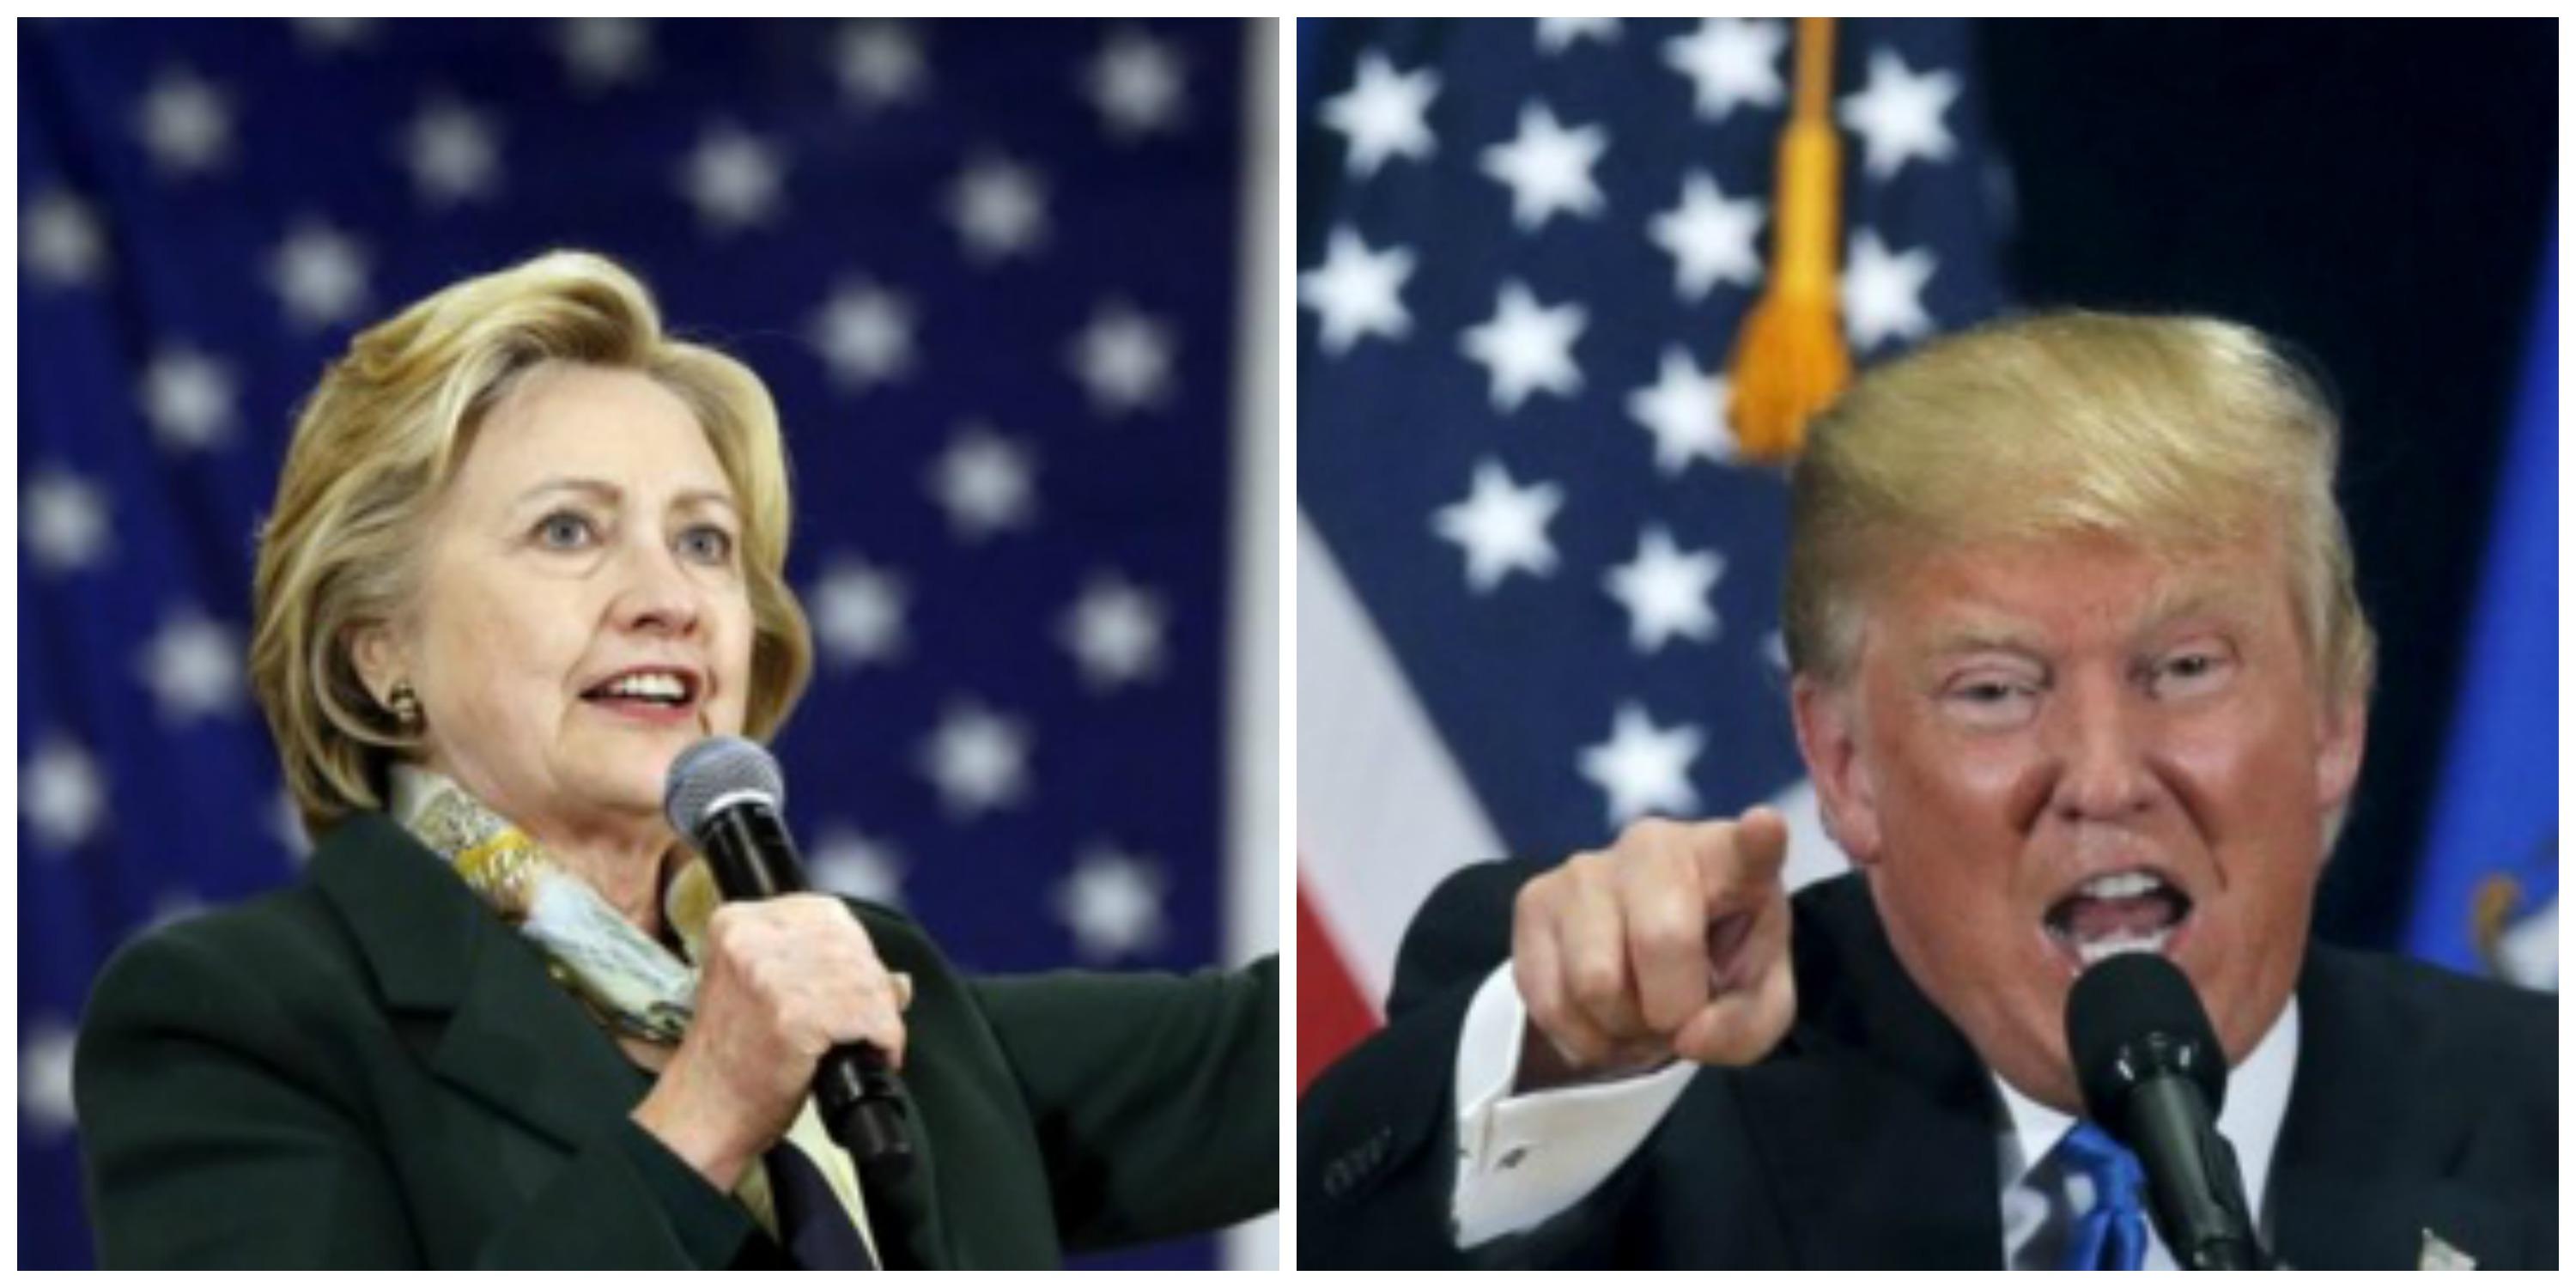 Trump catches up to Clinton, latest Reuters/Ipsos poll finds